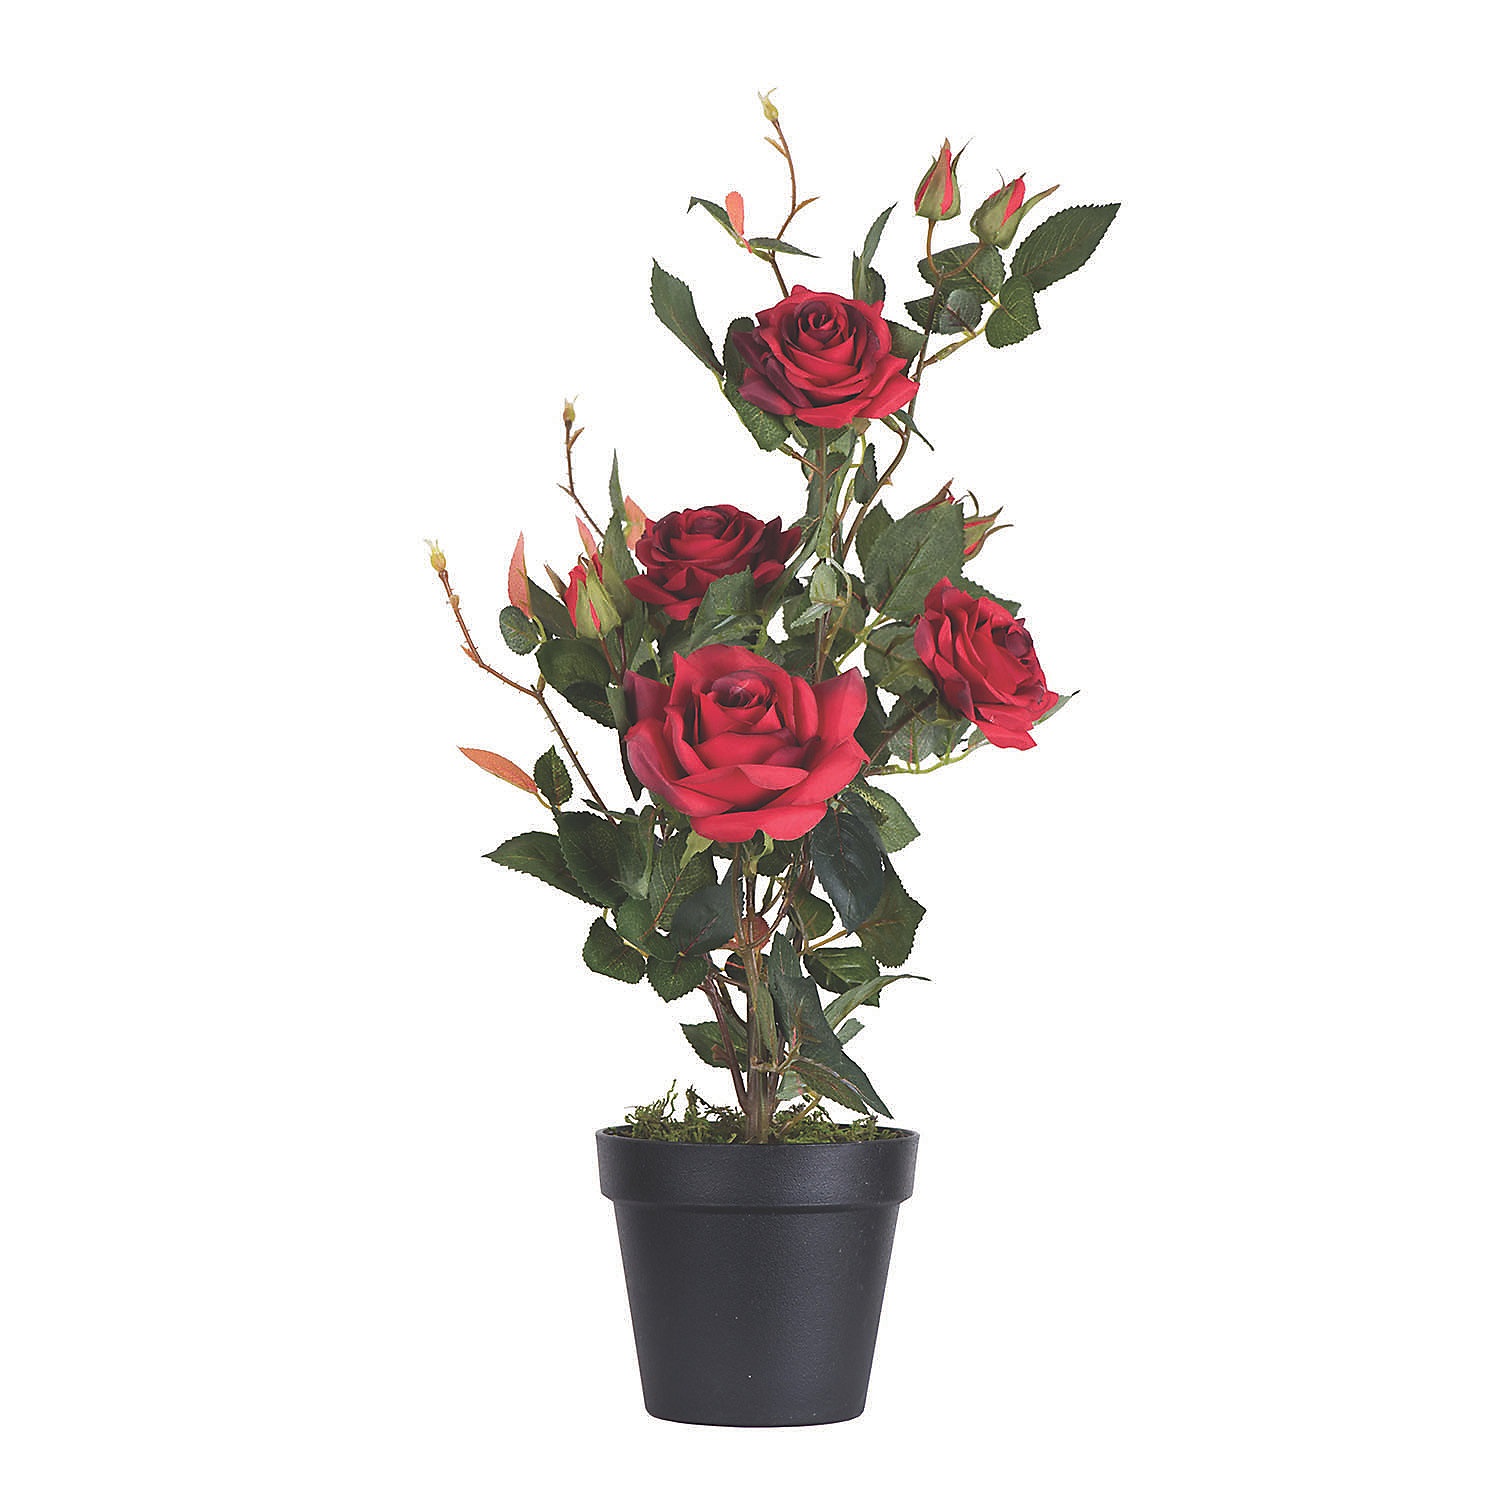 vickerman-21-artificial-red-rose-plant-in-pot_13938900